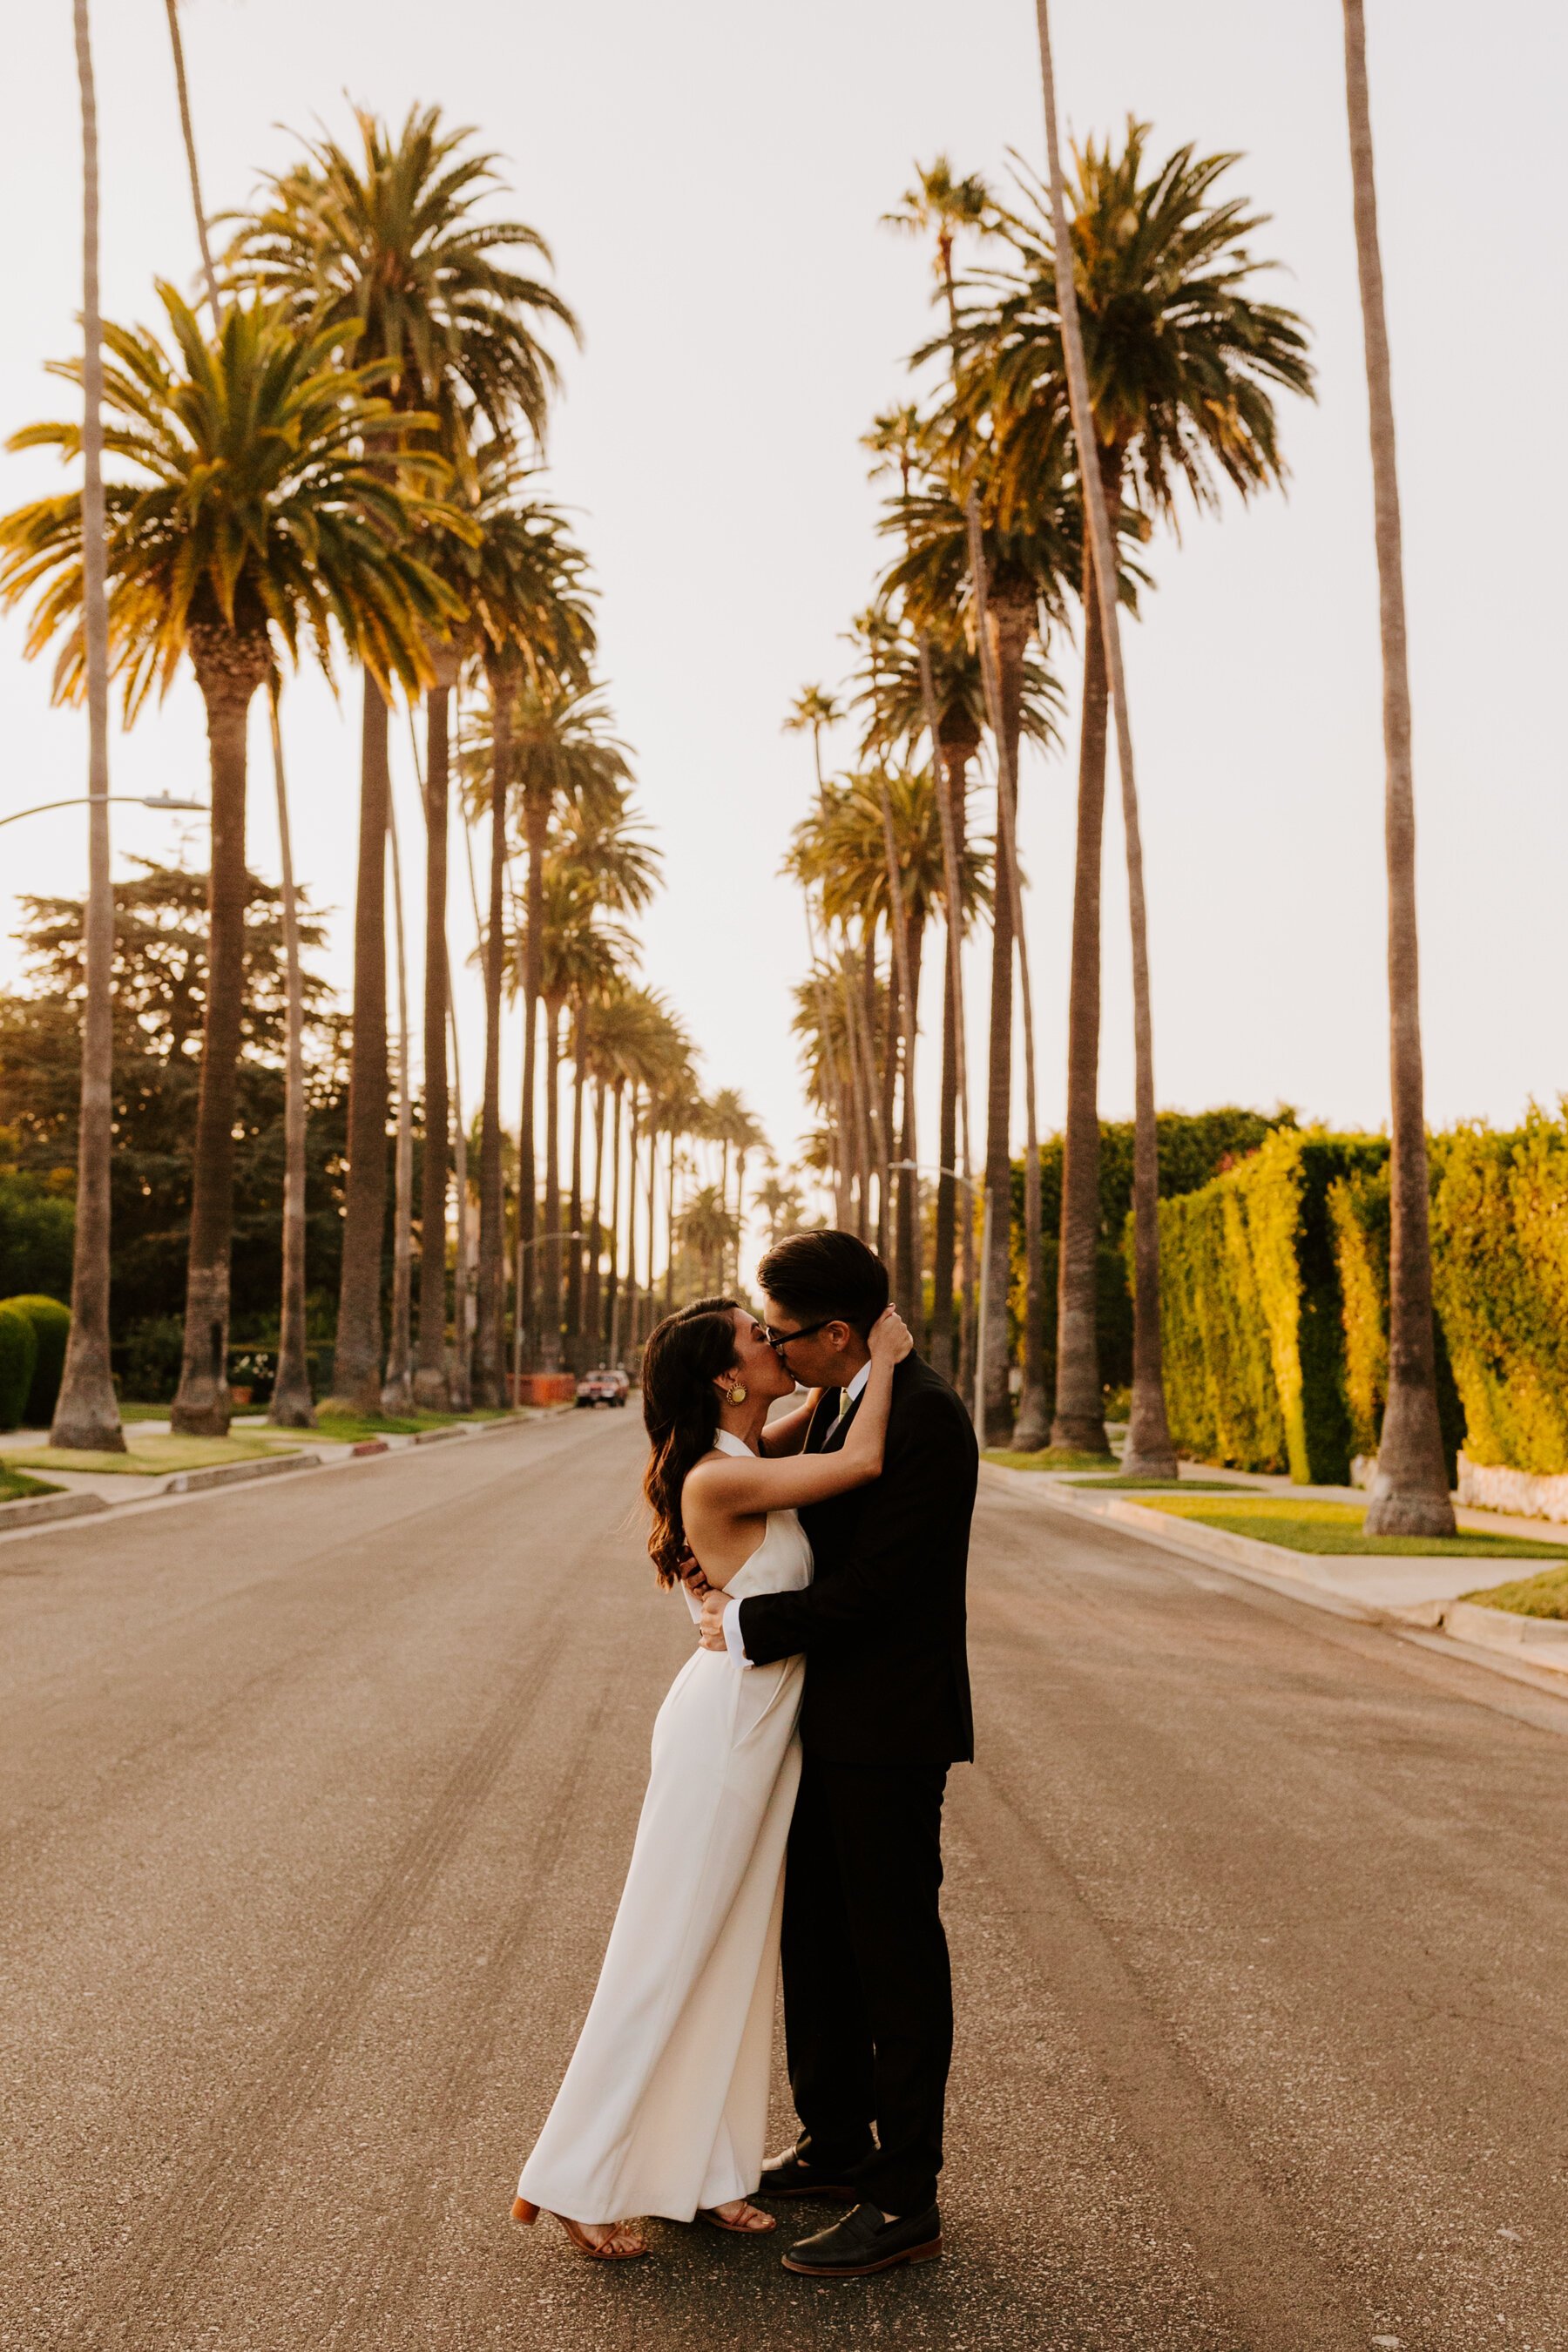 Beverly Hills Courthouse Elopement | Beverly Hills Cactus Garden | Los Angeles Wedding Photographer | Tida Svy | www.tidasvy.com